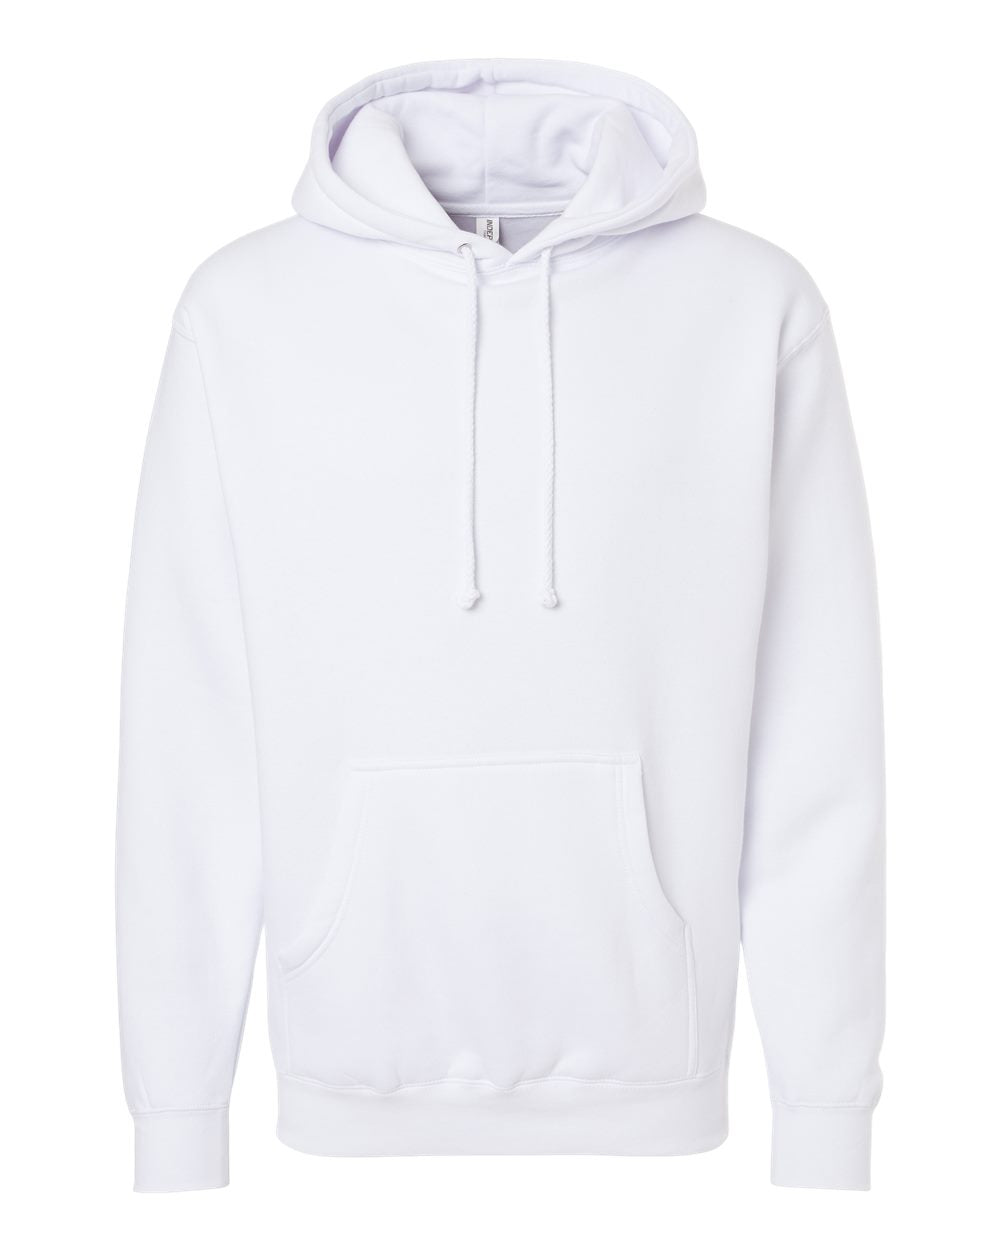 Independent Trading Co. - Heavyweight Hooded Sweatshirt - IND4000